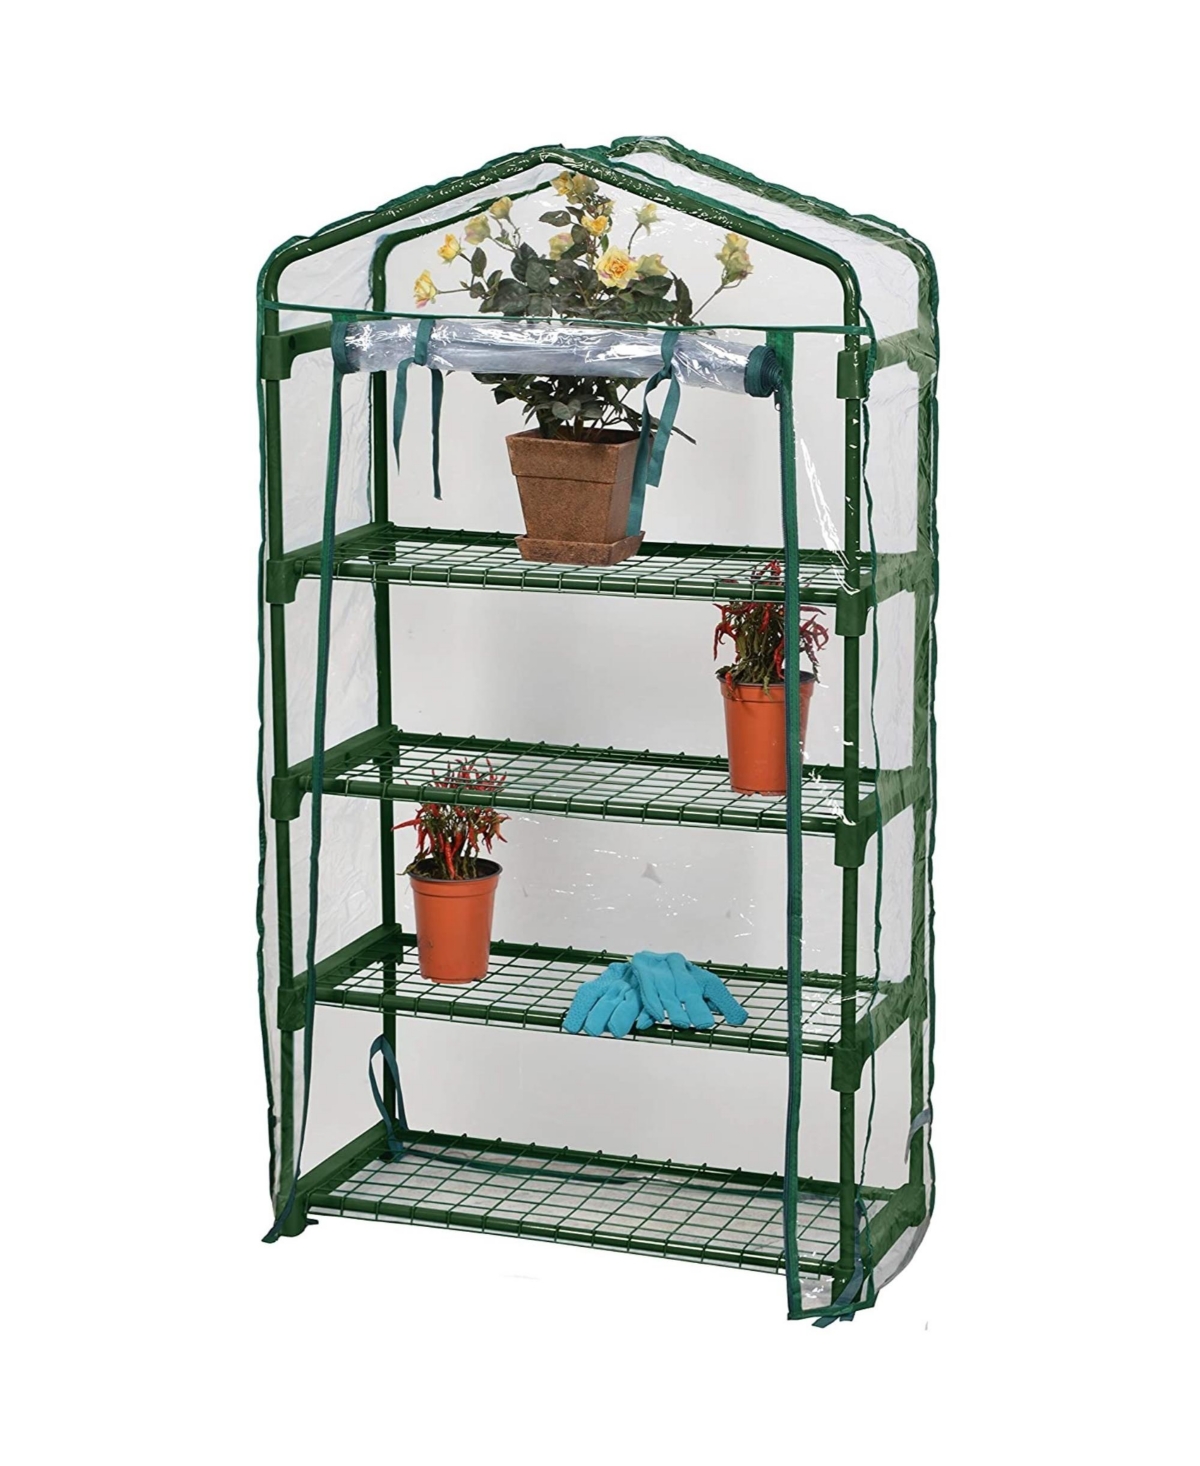 Bond Manufacturing Bloom 4 Tier Greenhouse Small, Green 49 tall